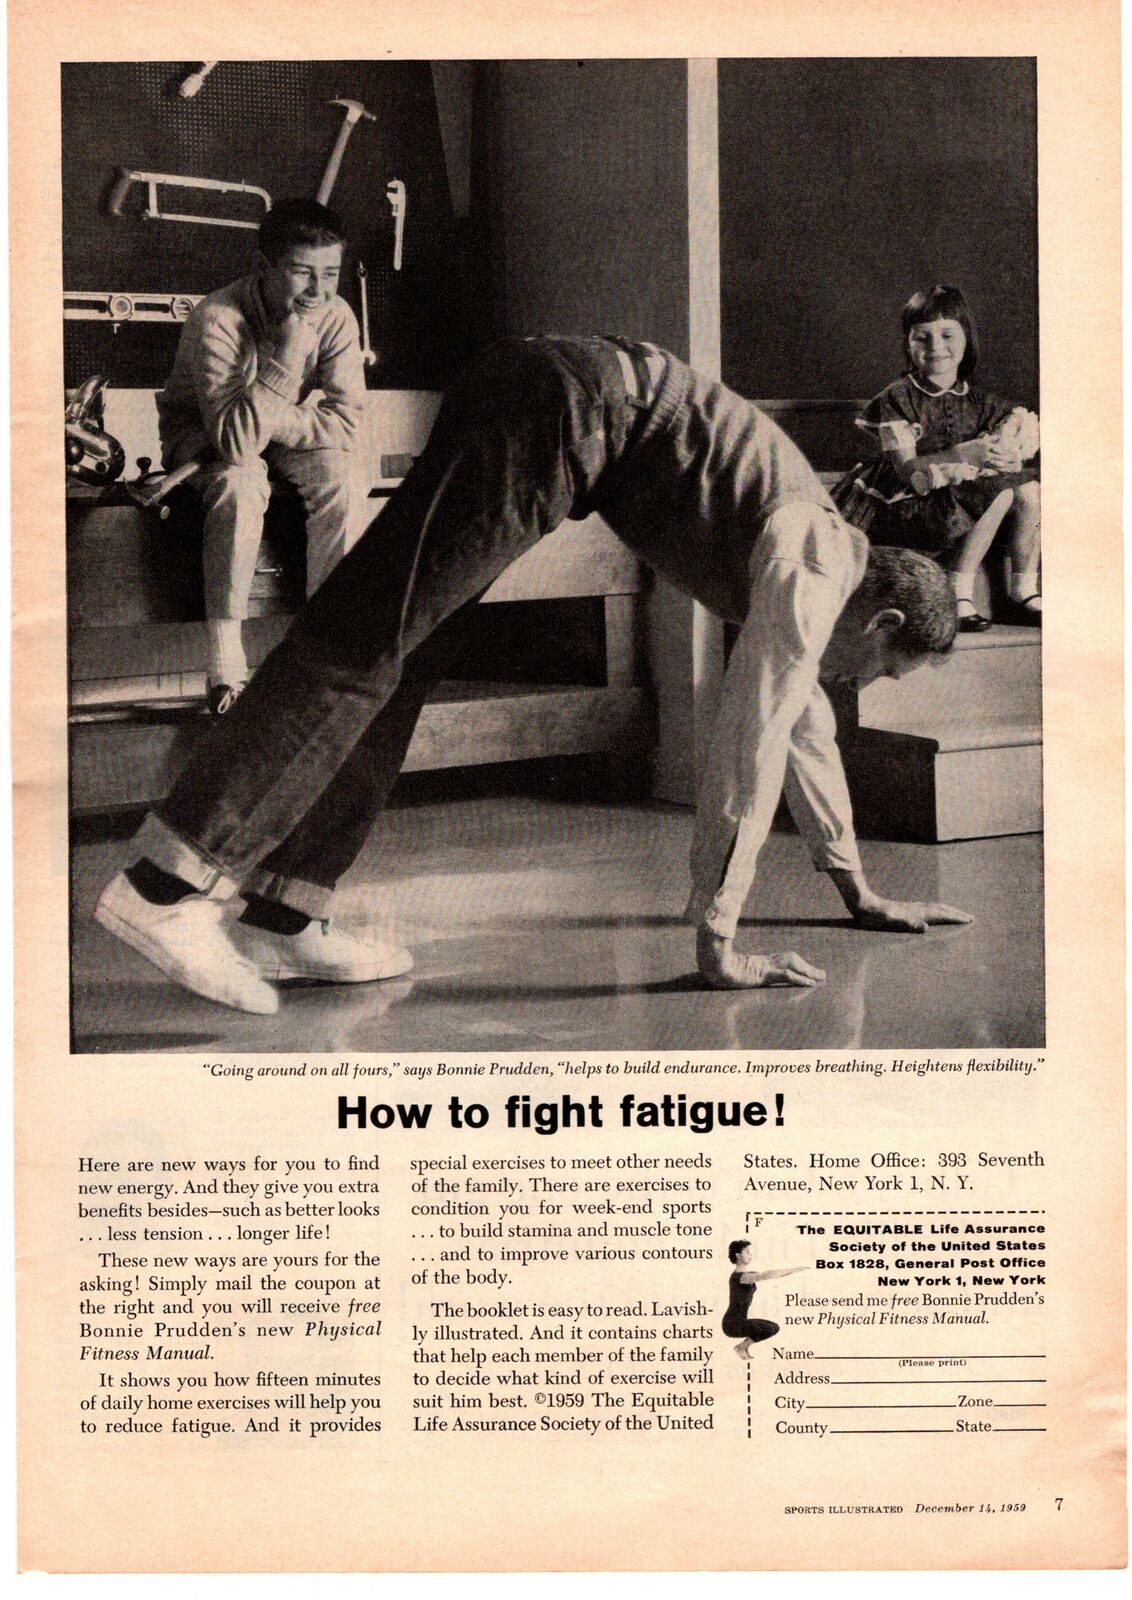 1958 Equitable Life "going Around On All Fours" Physical Fitness Manual Print Ad